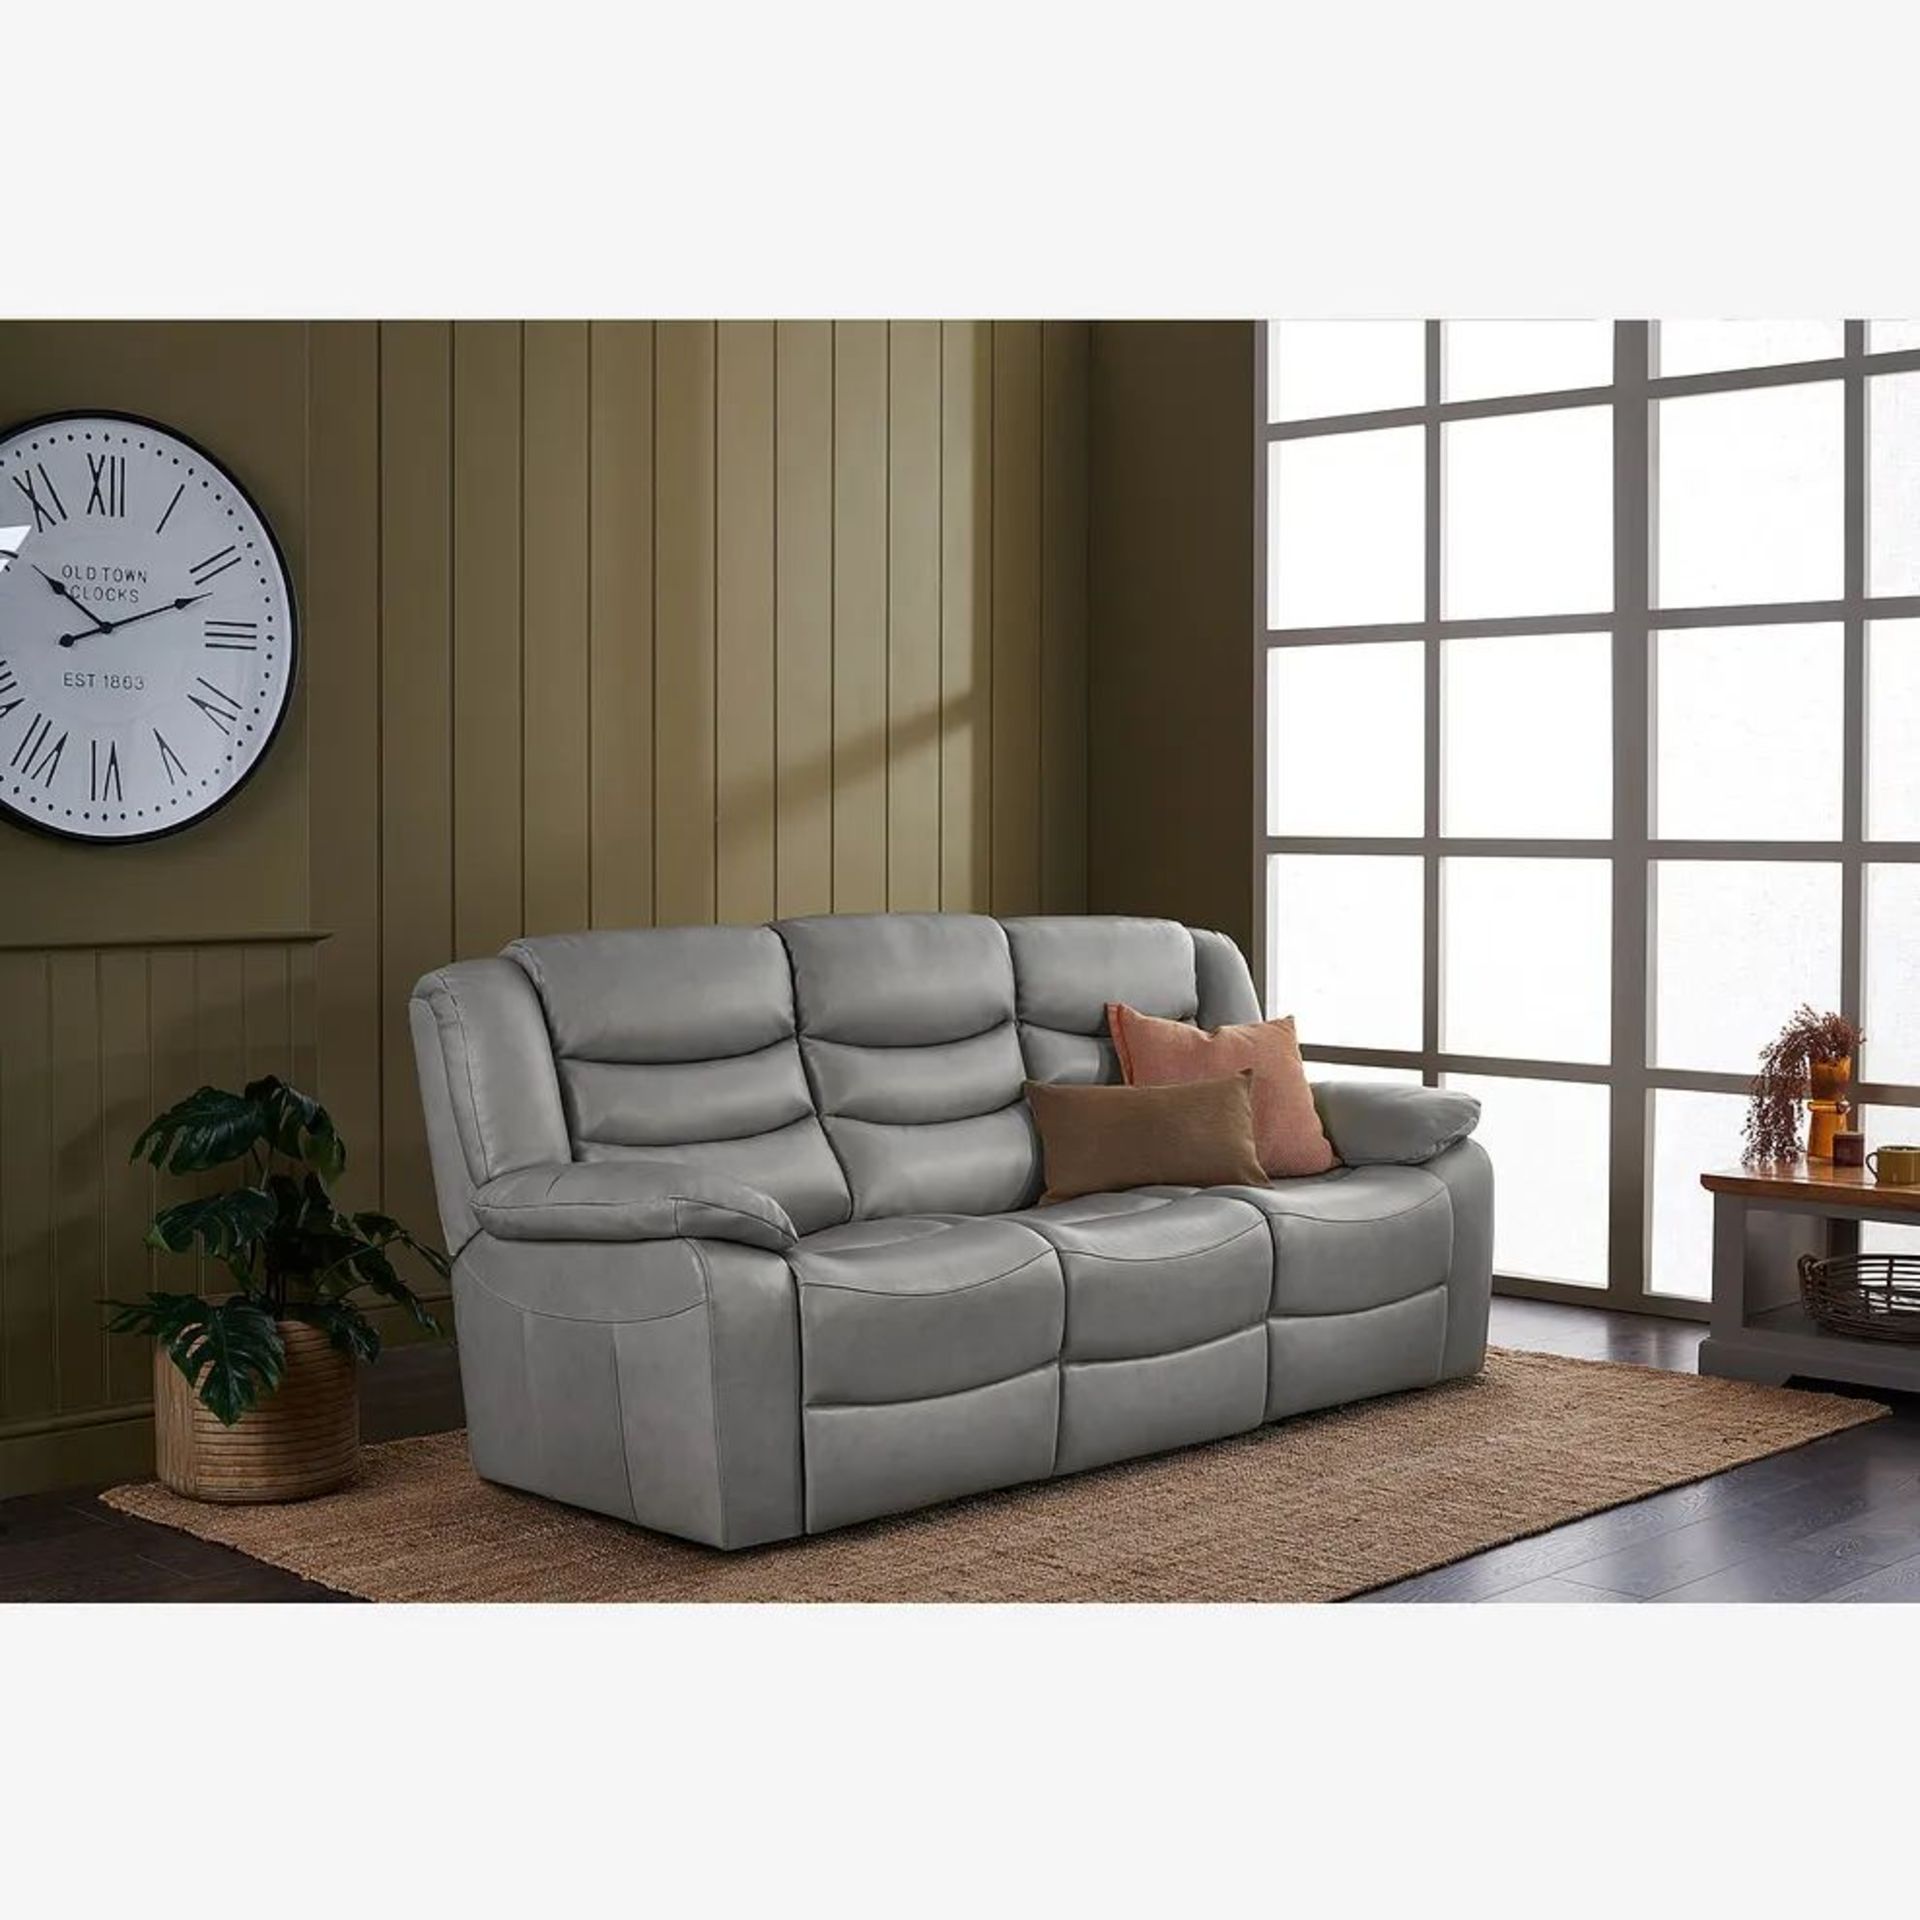 BRAND NEW MARLOW 3 Seater Sofa - LIGHT GREY LEATHER. RRP £1599. Our Marlow leather sofa range is a - Image 8 of 8